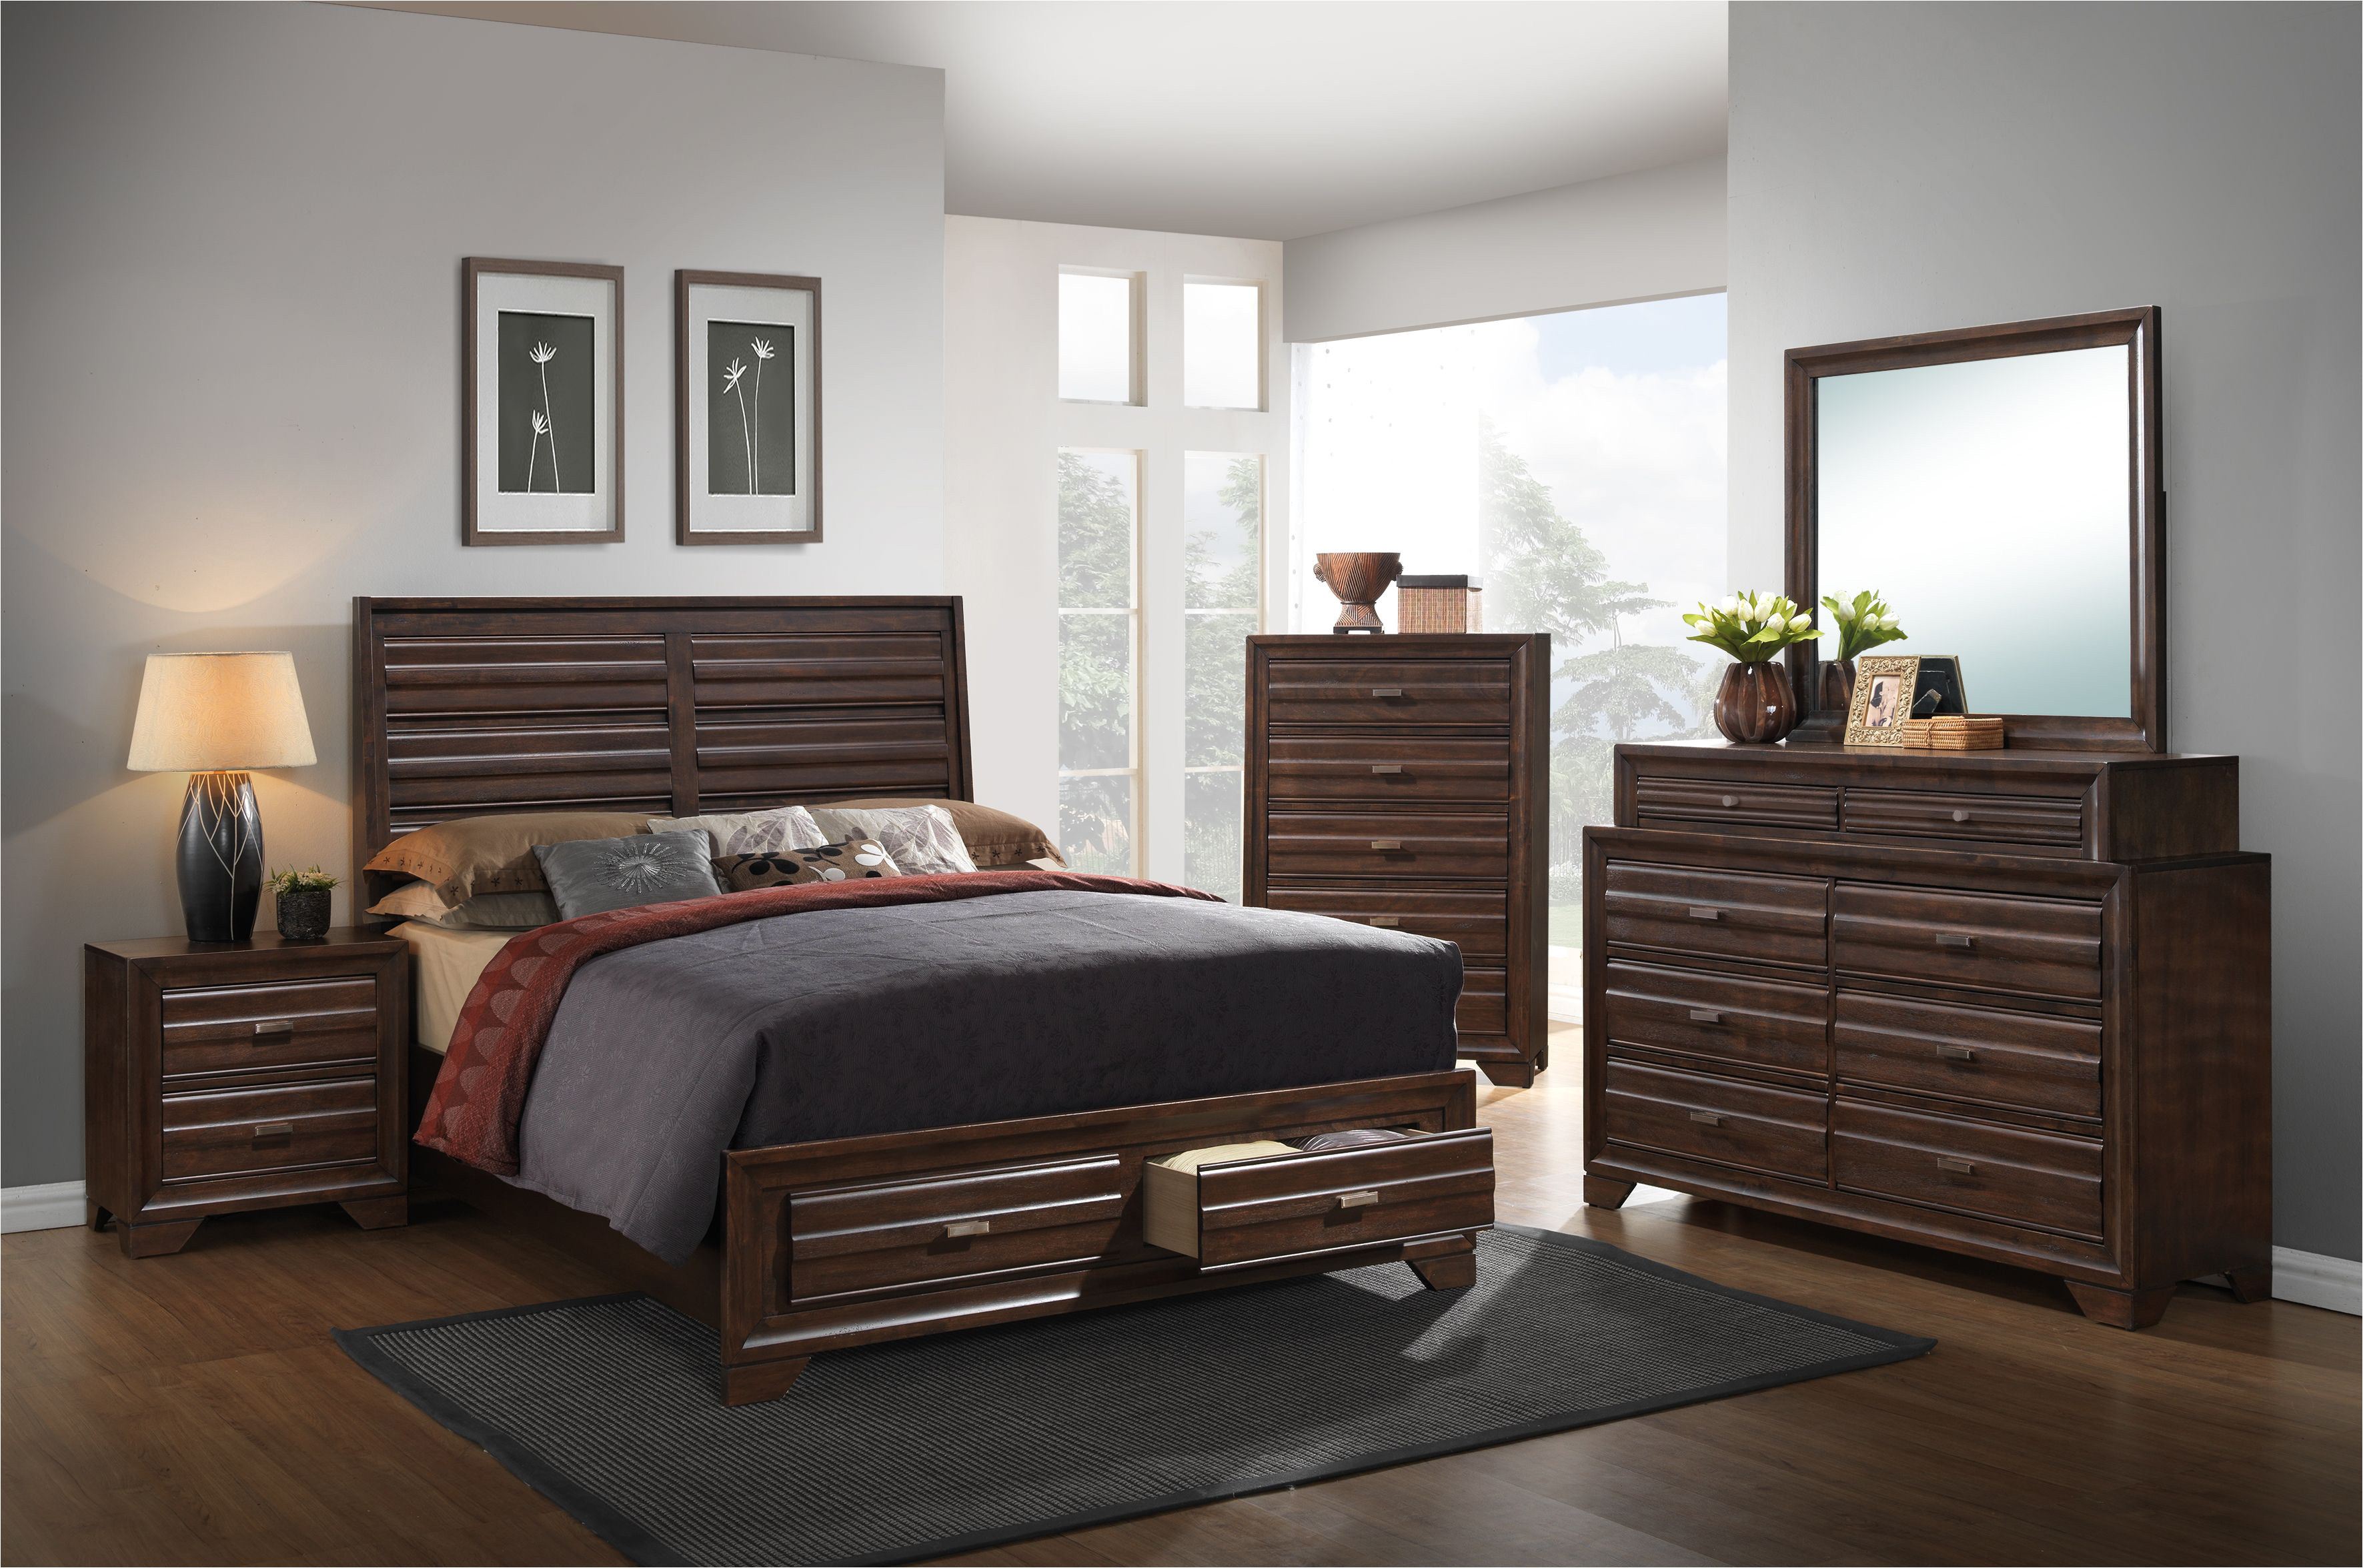 American Freight Discount Furniture Near Me | AdinaPorter